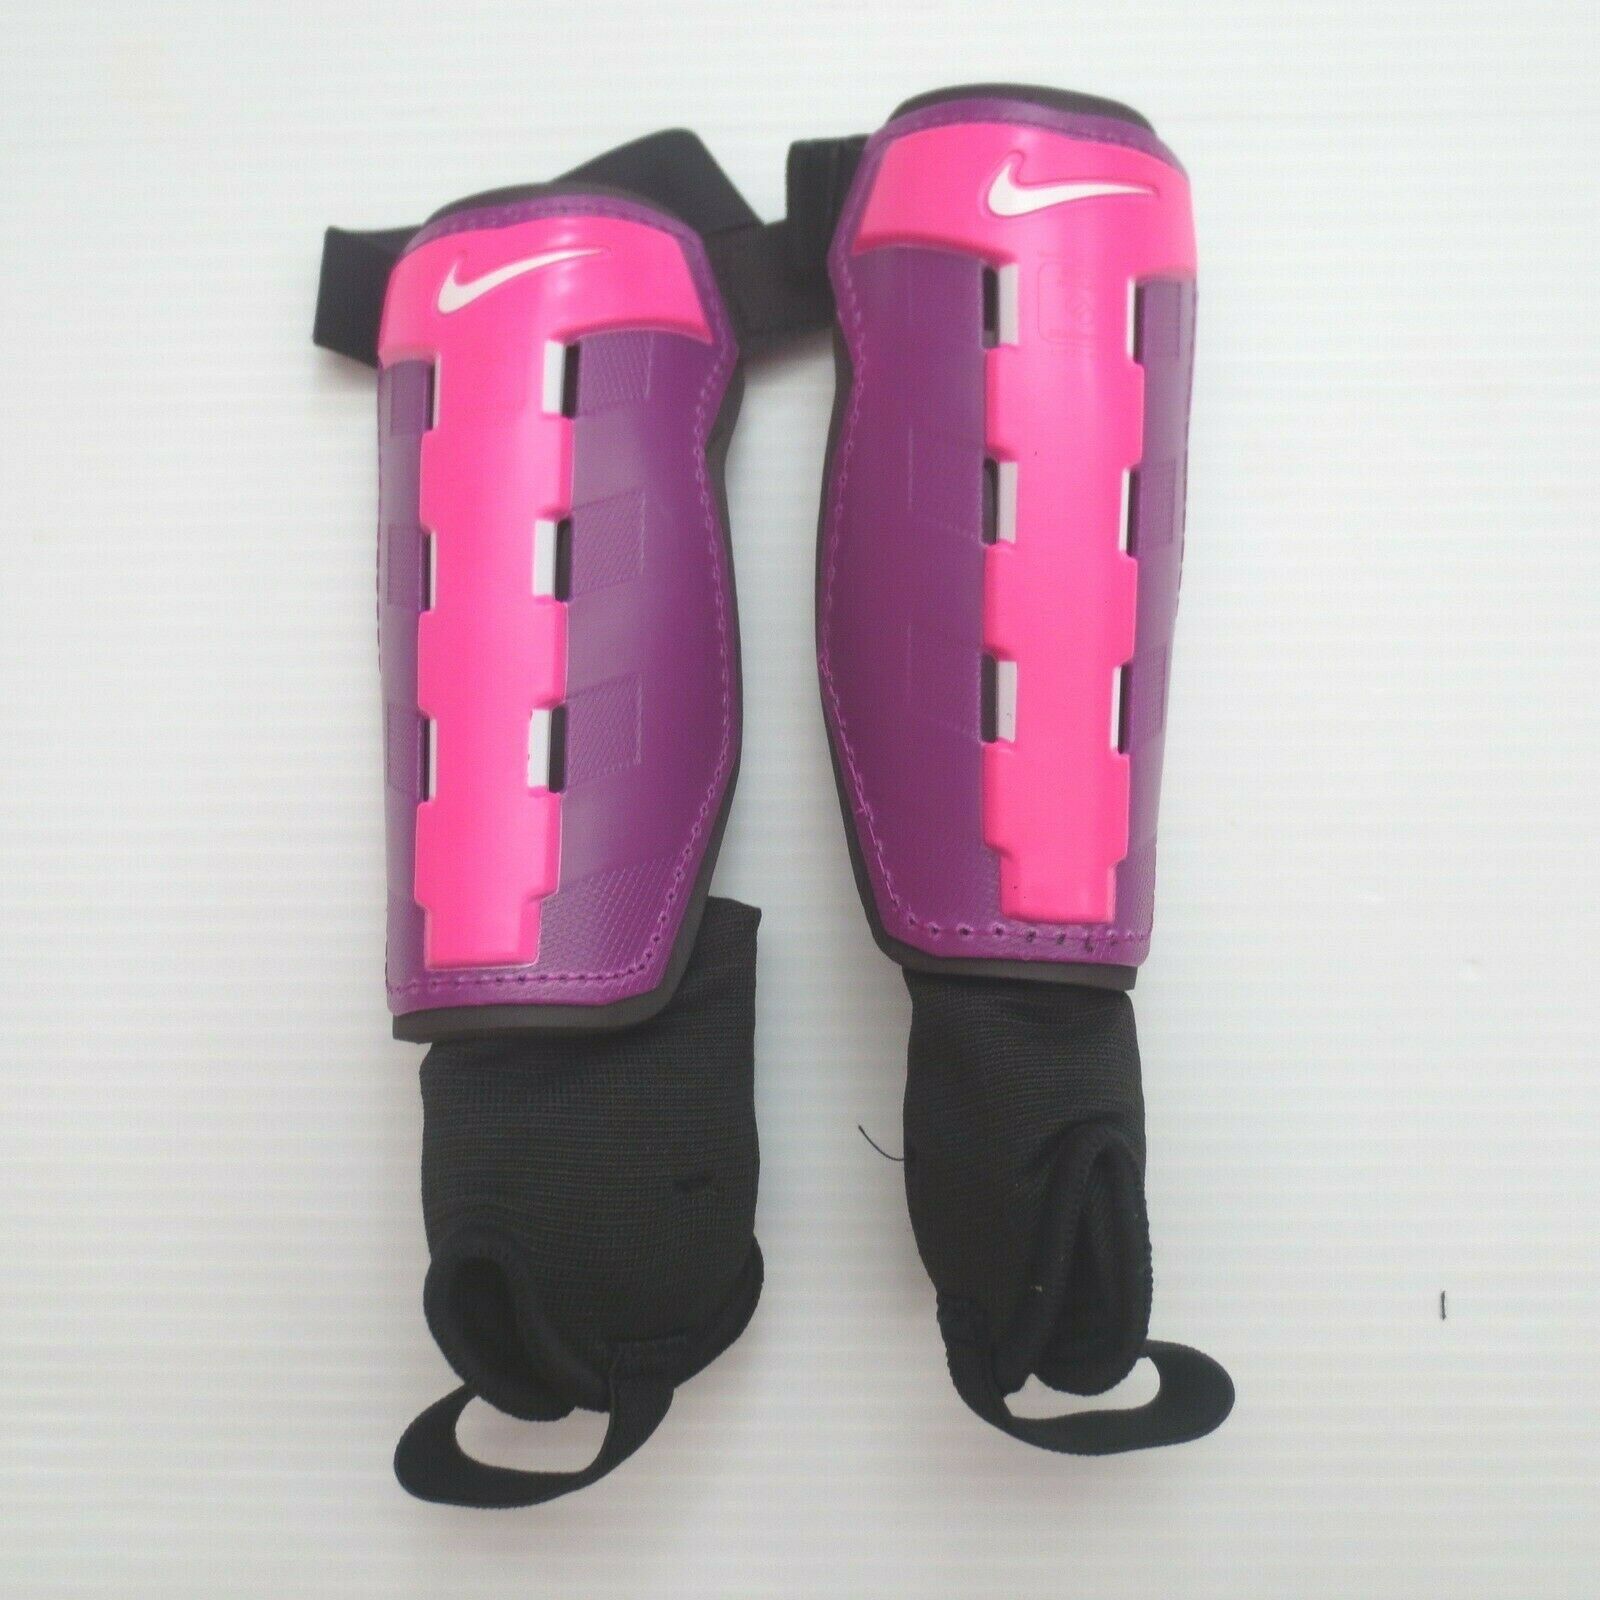 roltrap mogelijkheid surfen Nike Youth Charge Shin Guards - SP0270 - and 24 similar items